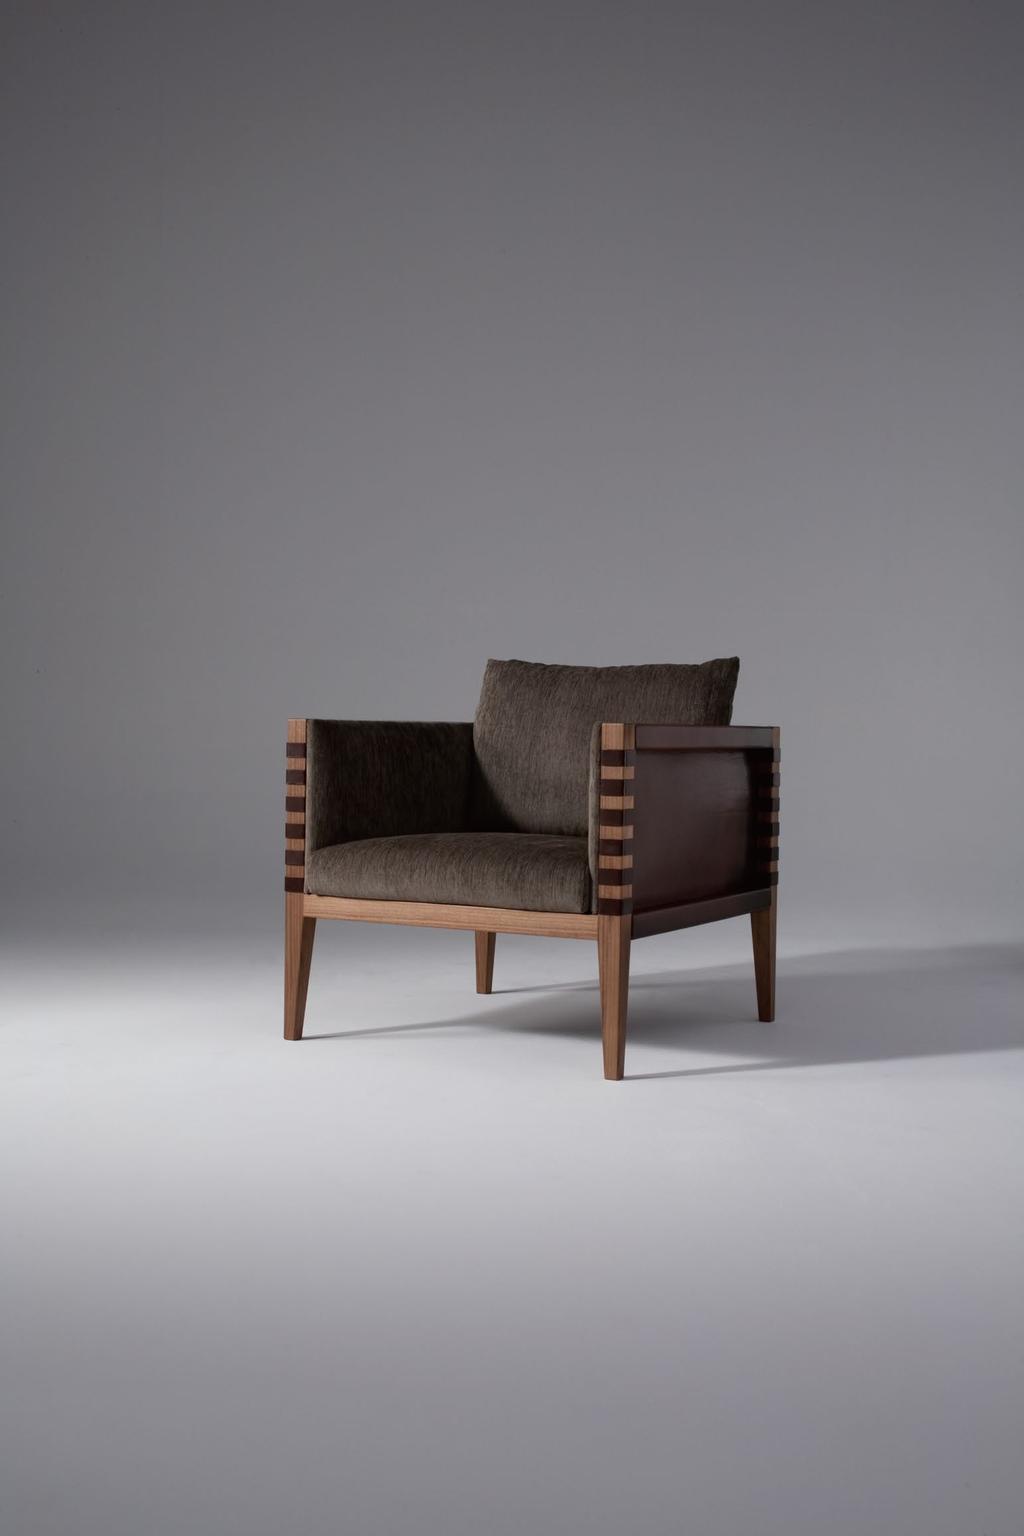 LUPIN 2014 LOUNGE CHAIR Design : ATELIER D.Q. Frame: Oiled walnut and leather Padding and Cushion: Fabric The square form of the sofa imparts a feeling of relaxation and comfort.